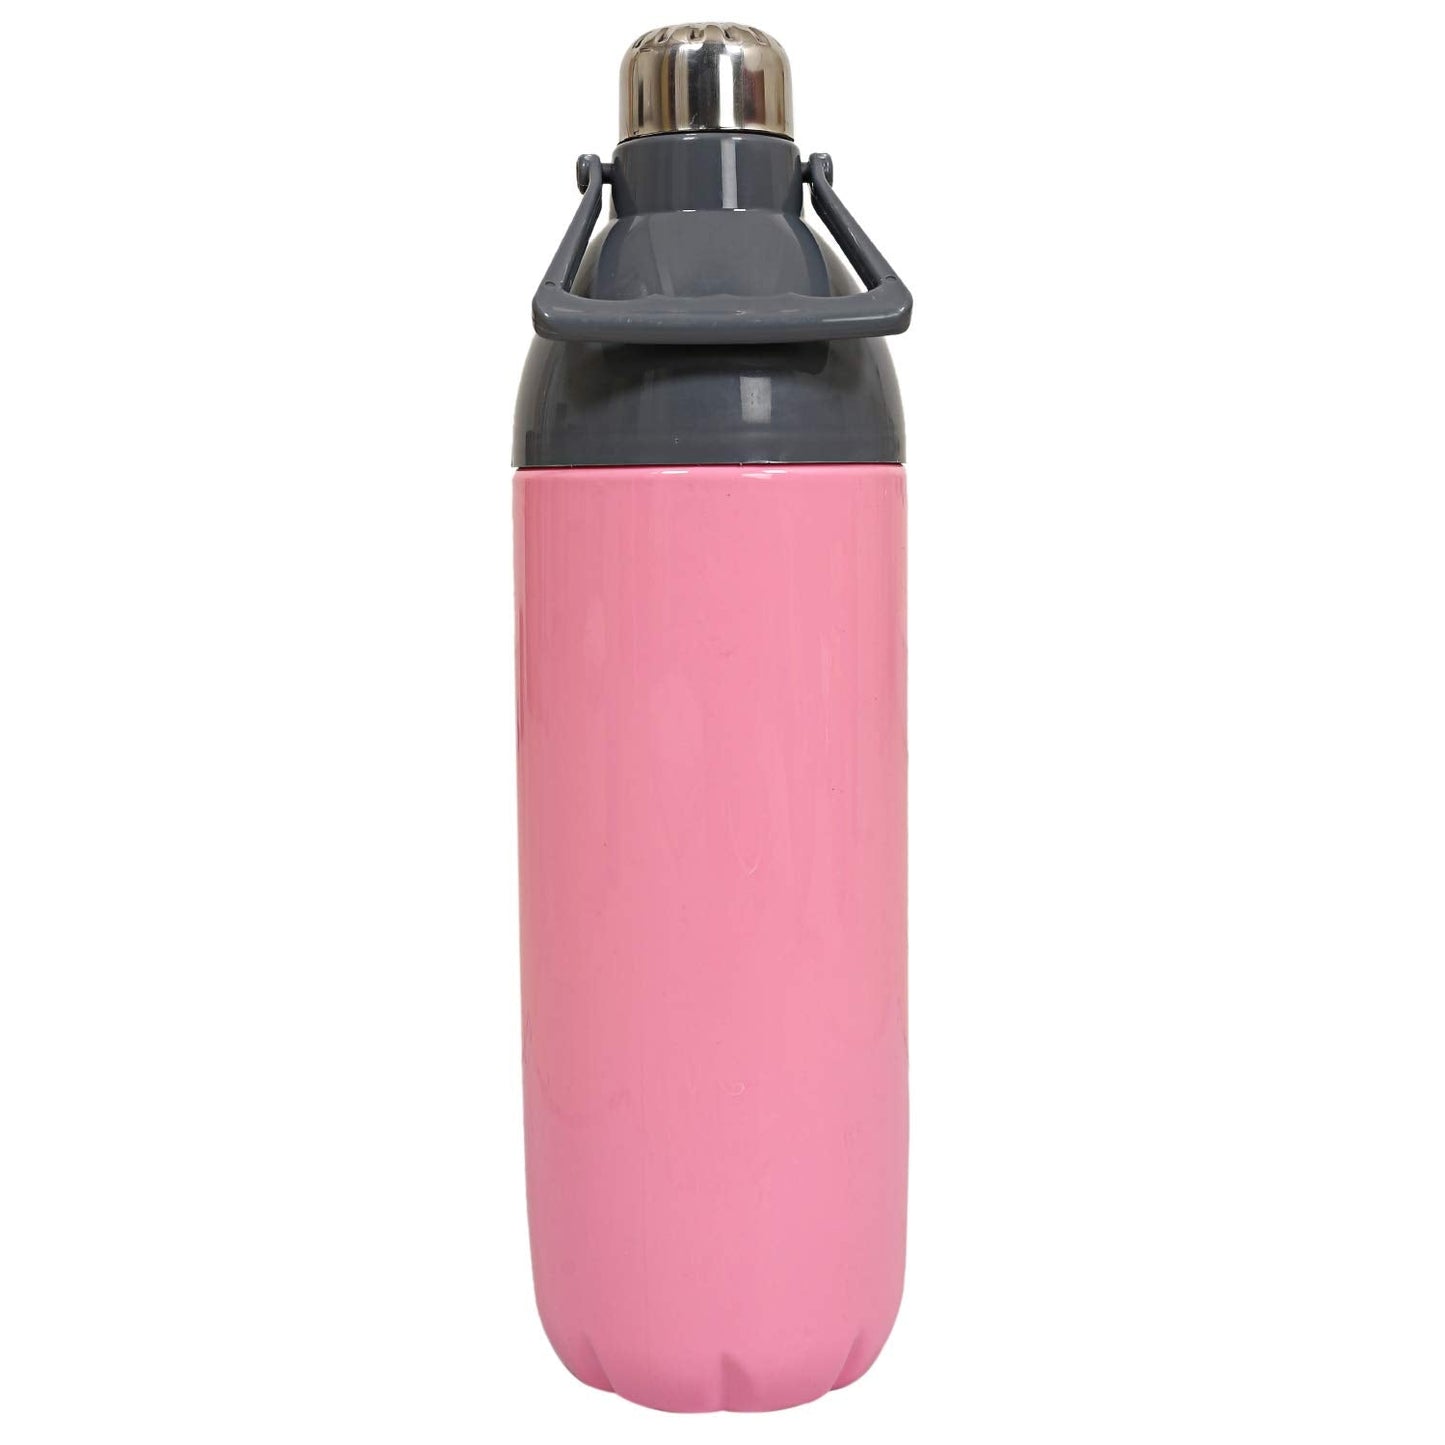 Kuber Industries Plastic Insulated Water Bottle with Handle 2200 ML Pink